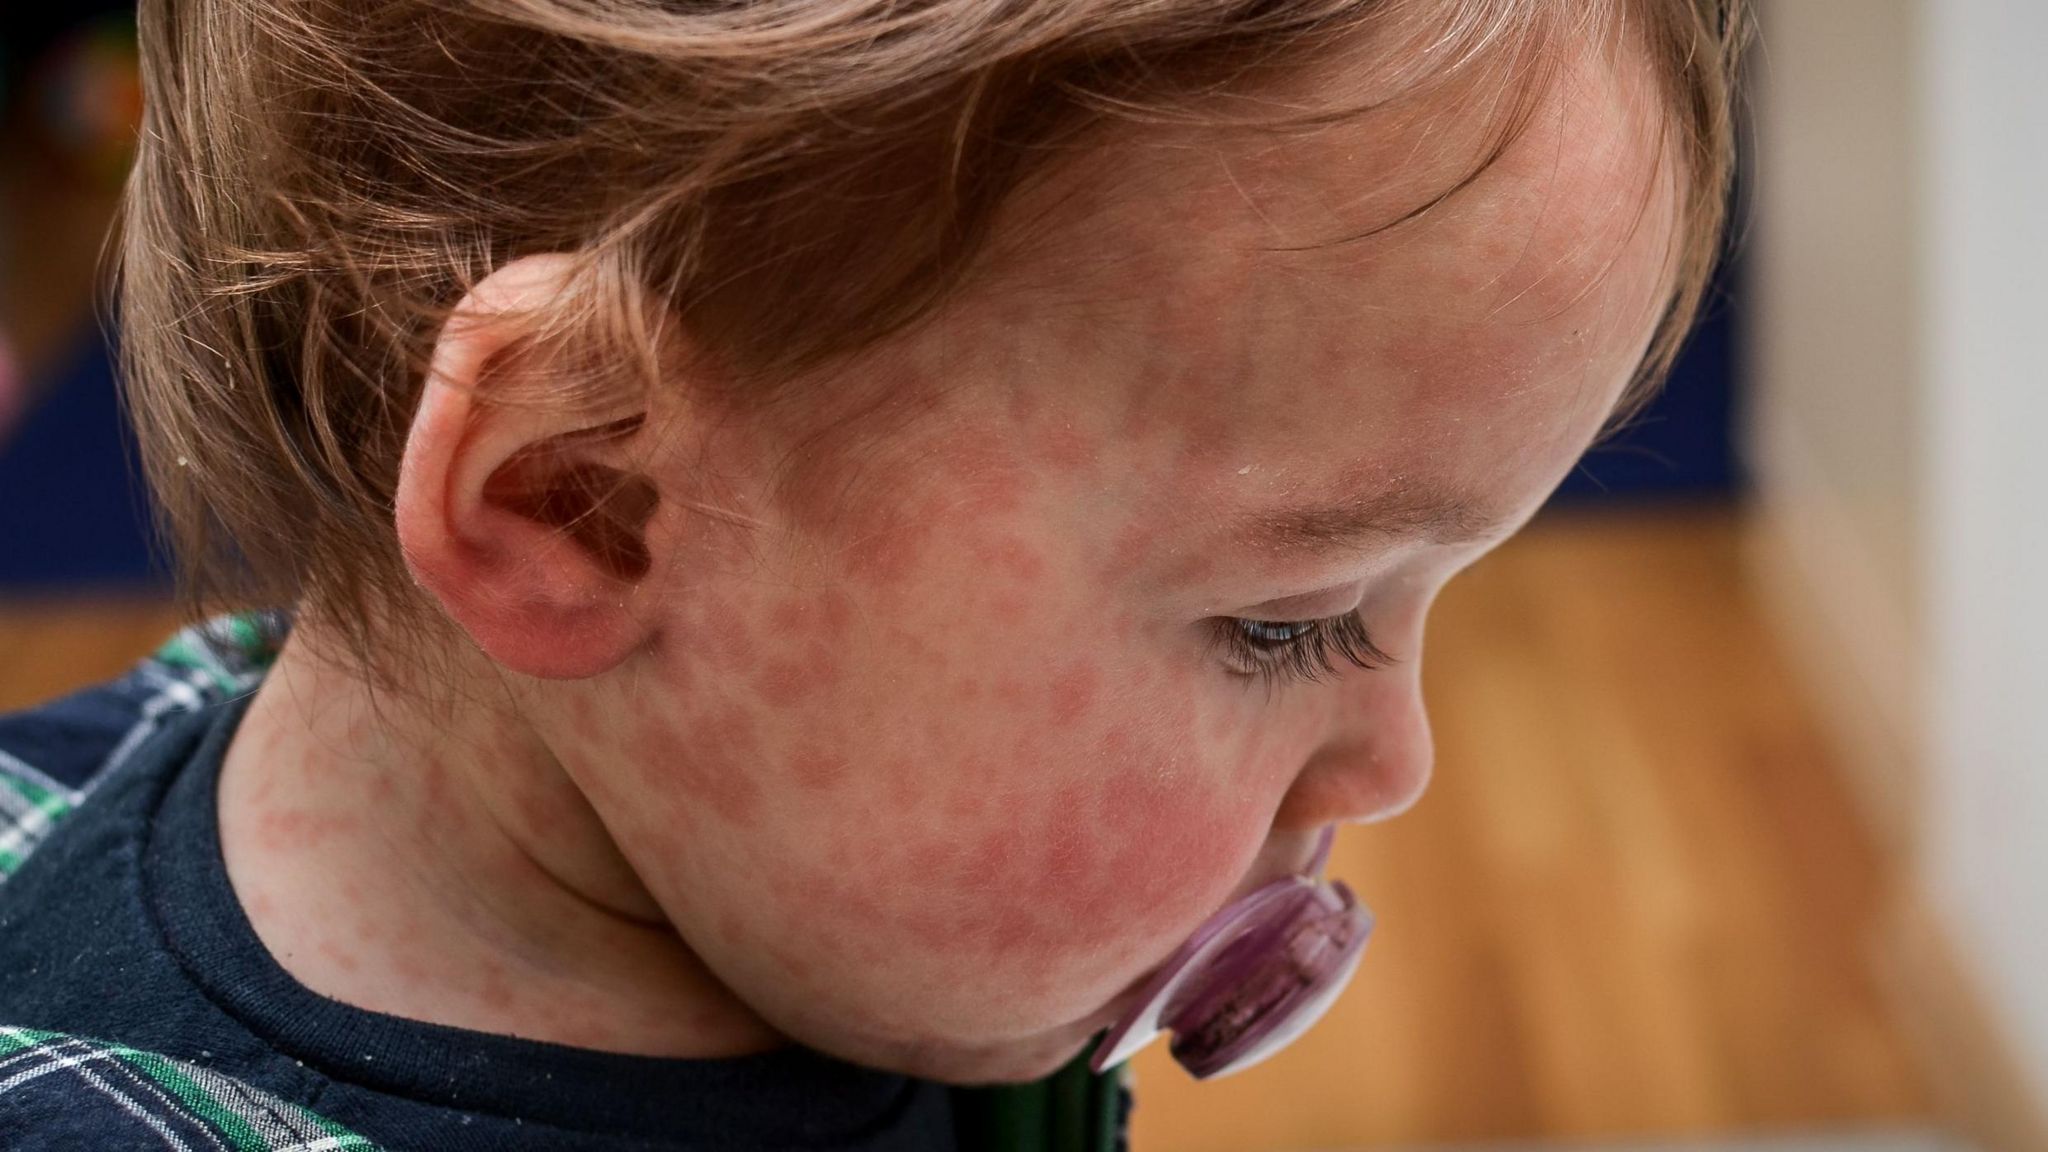 A toddler with a measles rash on the face and neck